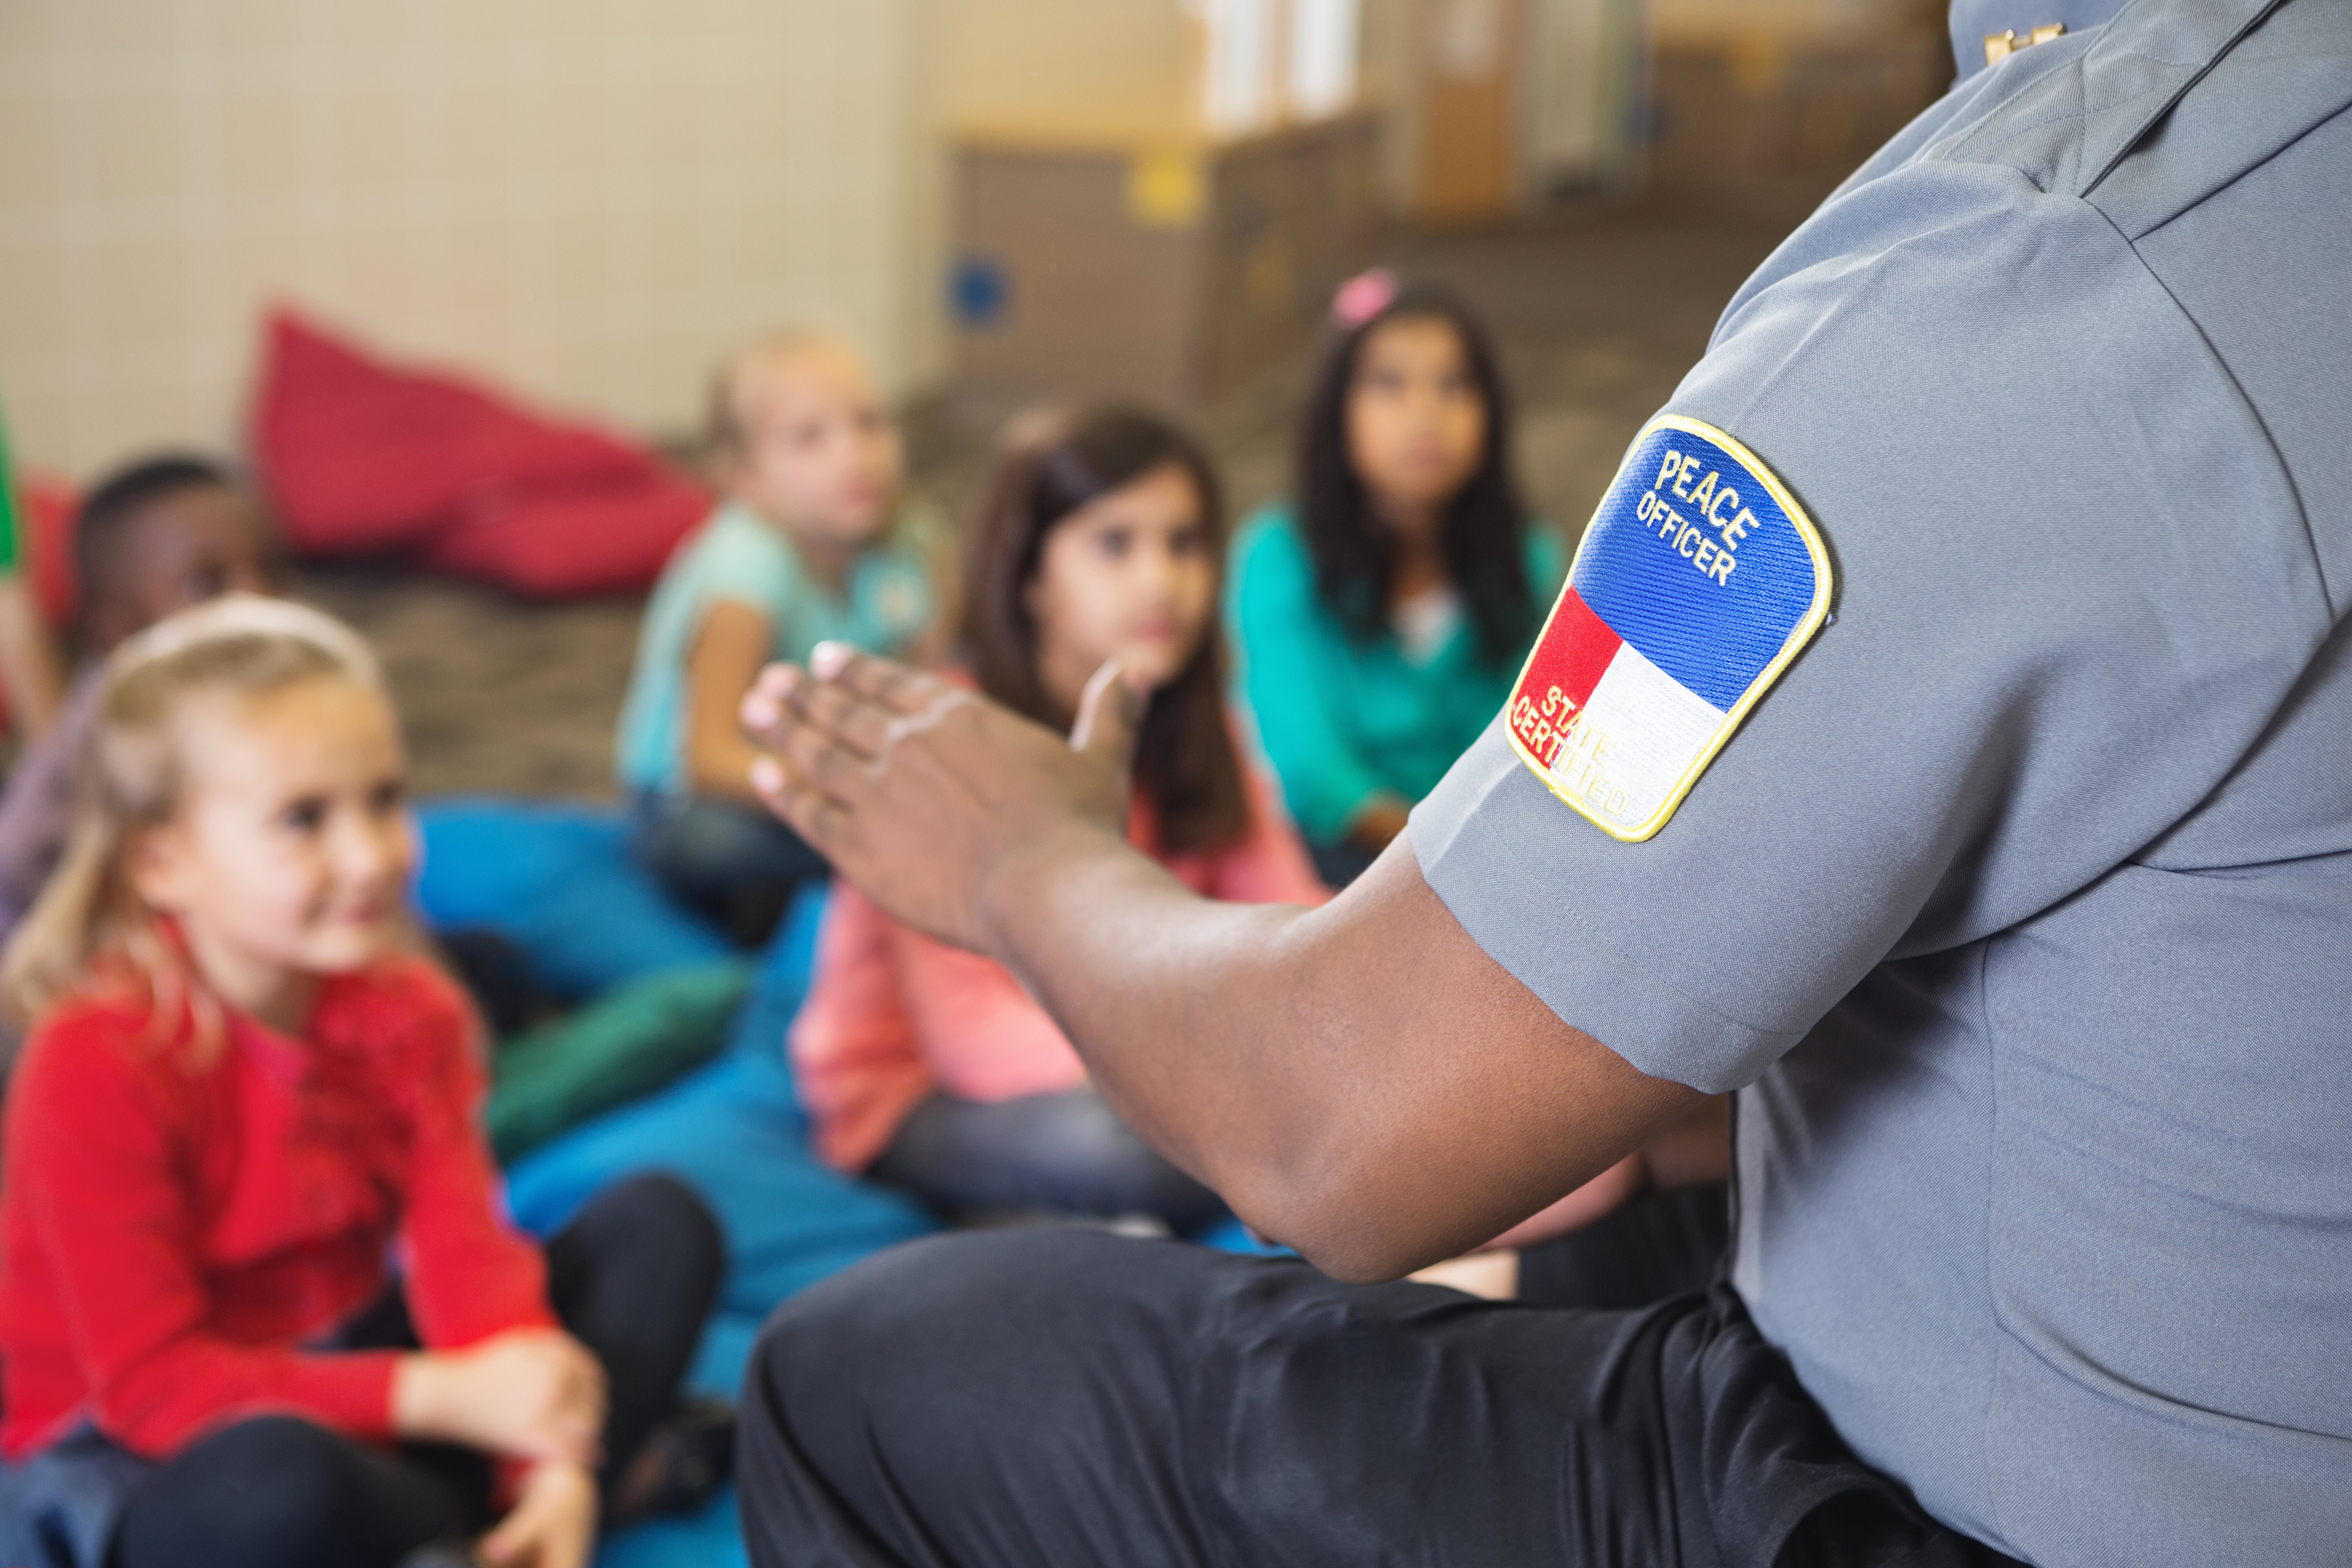 This New Jersey Bill Requires Schools Teach Students How To Interact With Police, But What About The Officers?
